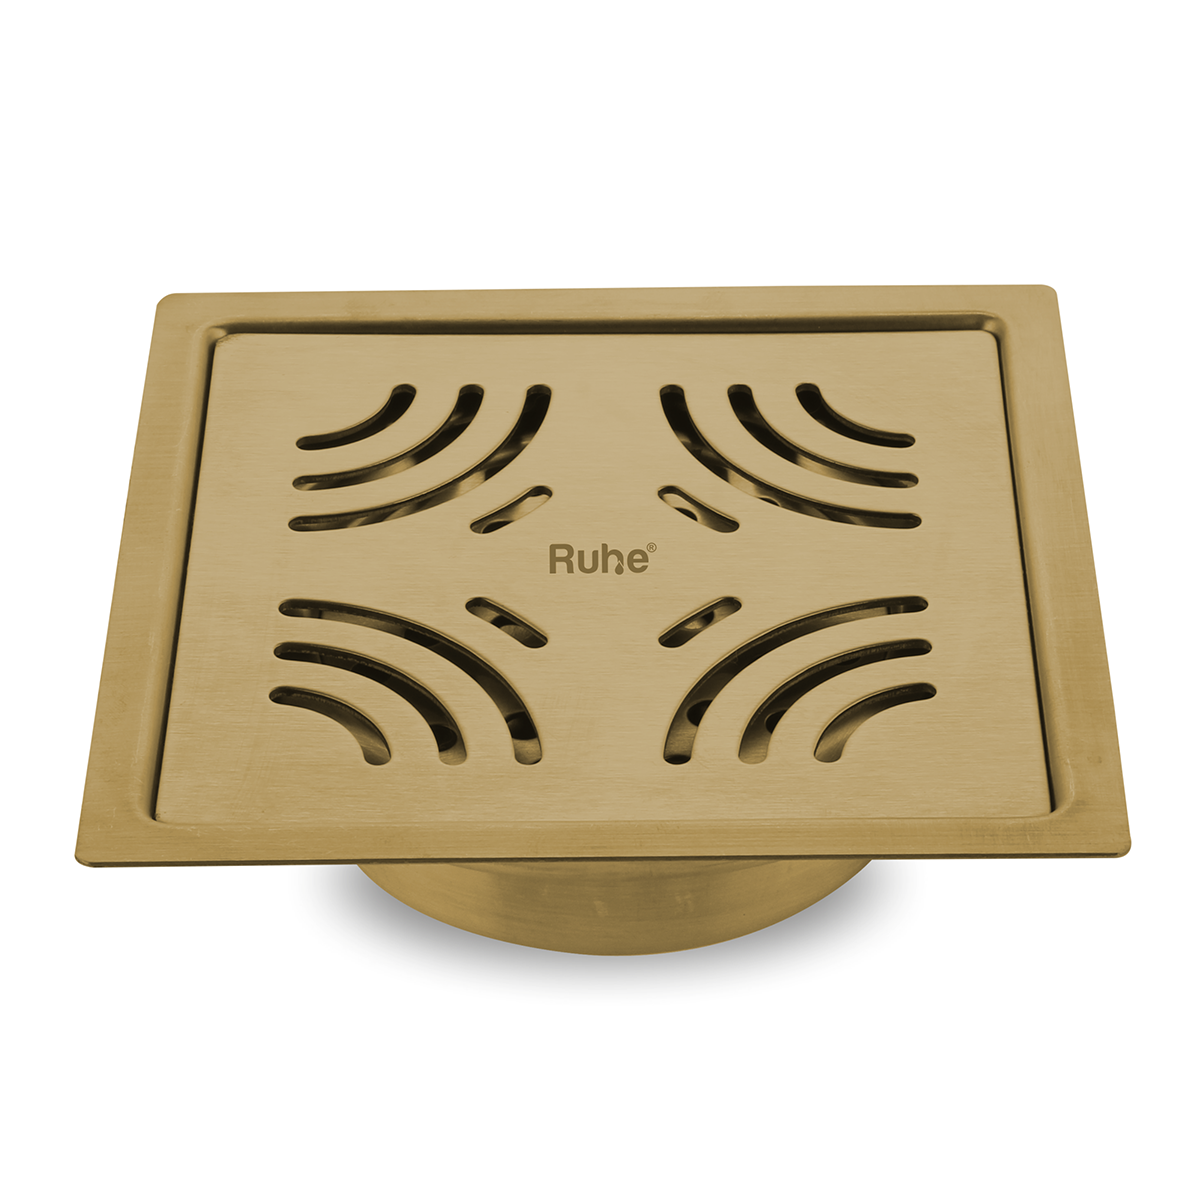 Emerald Square Flat Cut Floor Drain in Yellow Gold PVD Coating (5 x 5 Inches)